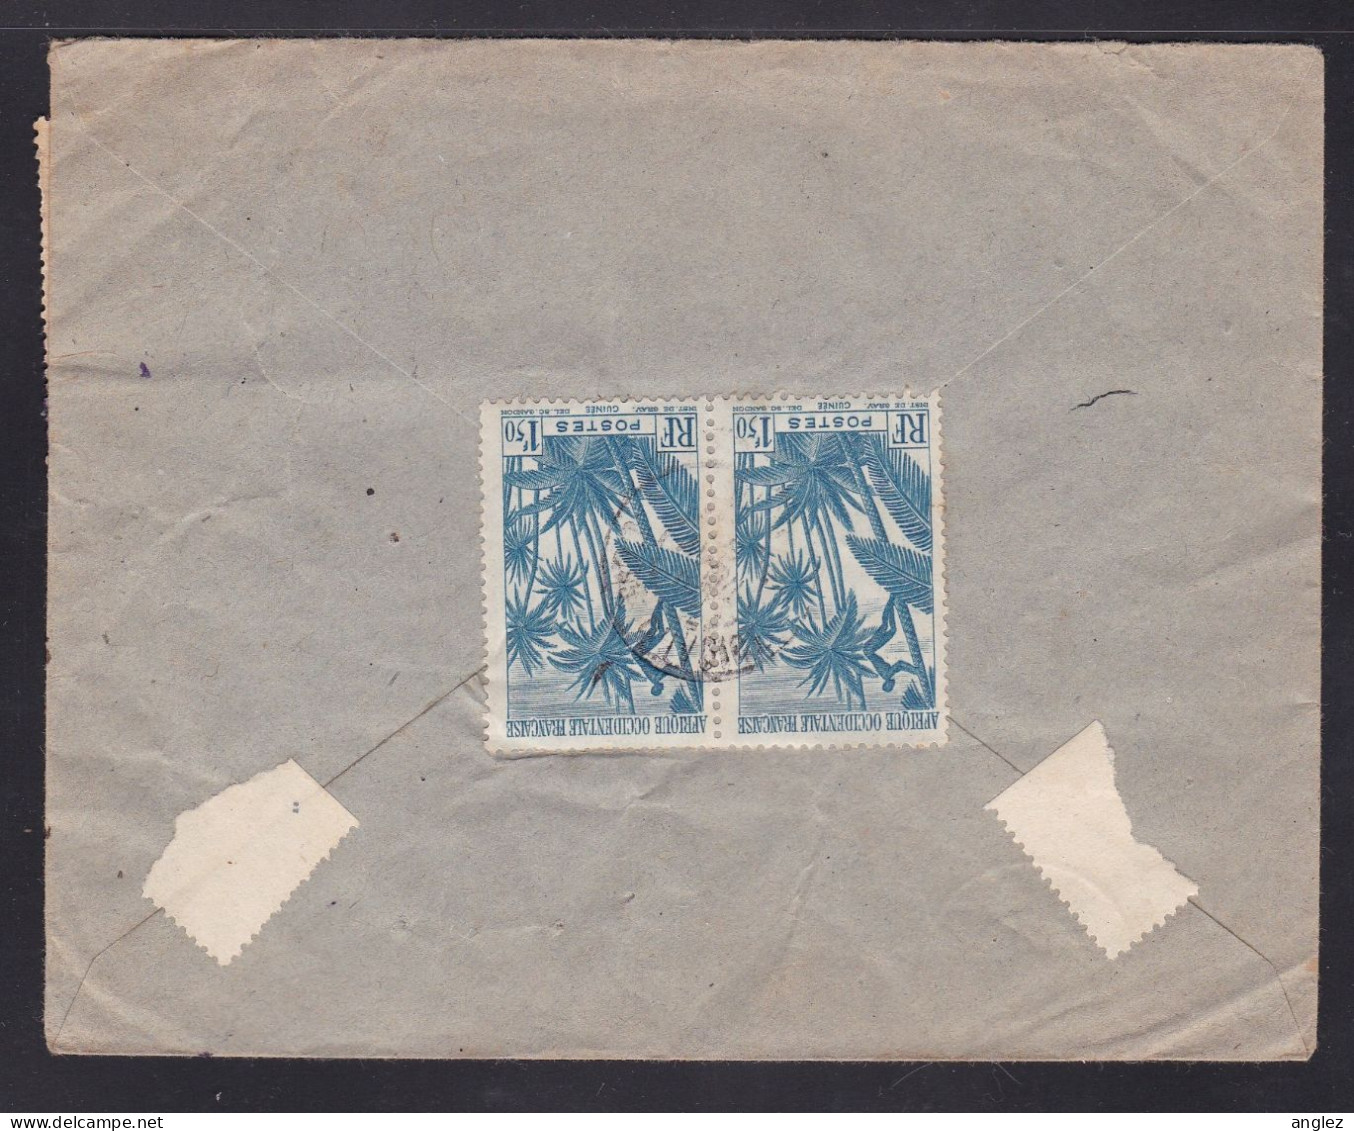 France / AOF / Cote D'Ivoire / Ivory Coast - 1950 Airmail Cover Divo To Chicago USA - Storia Postale